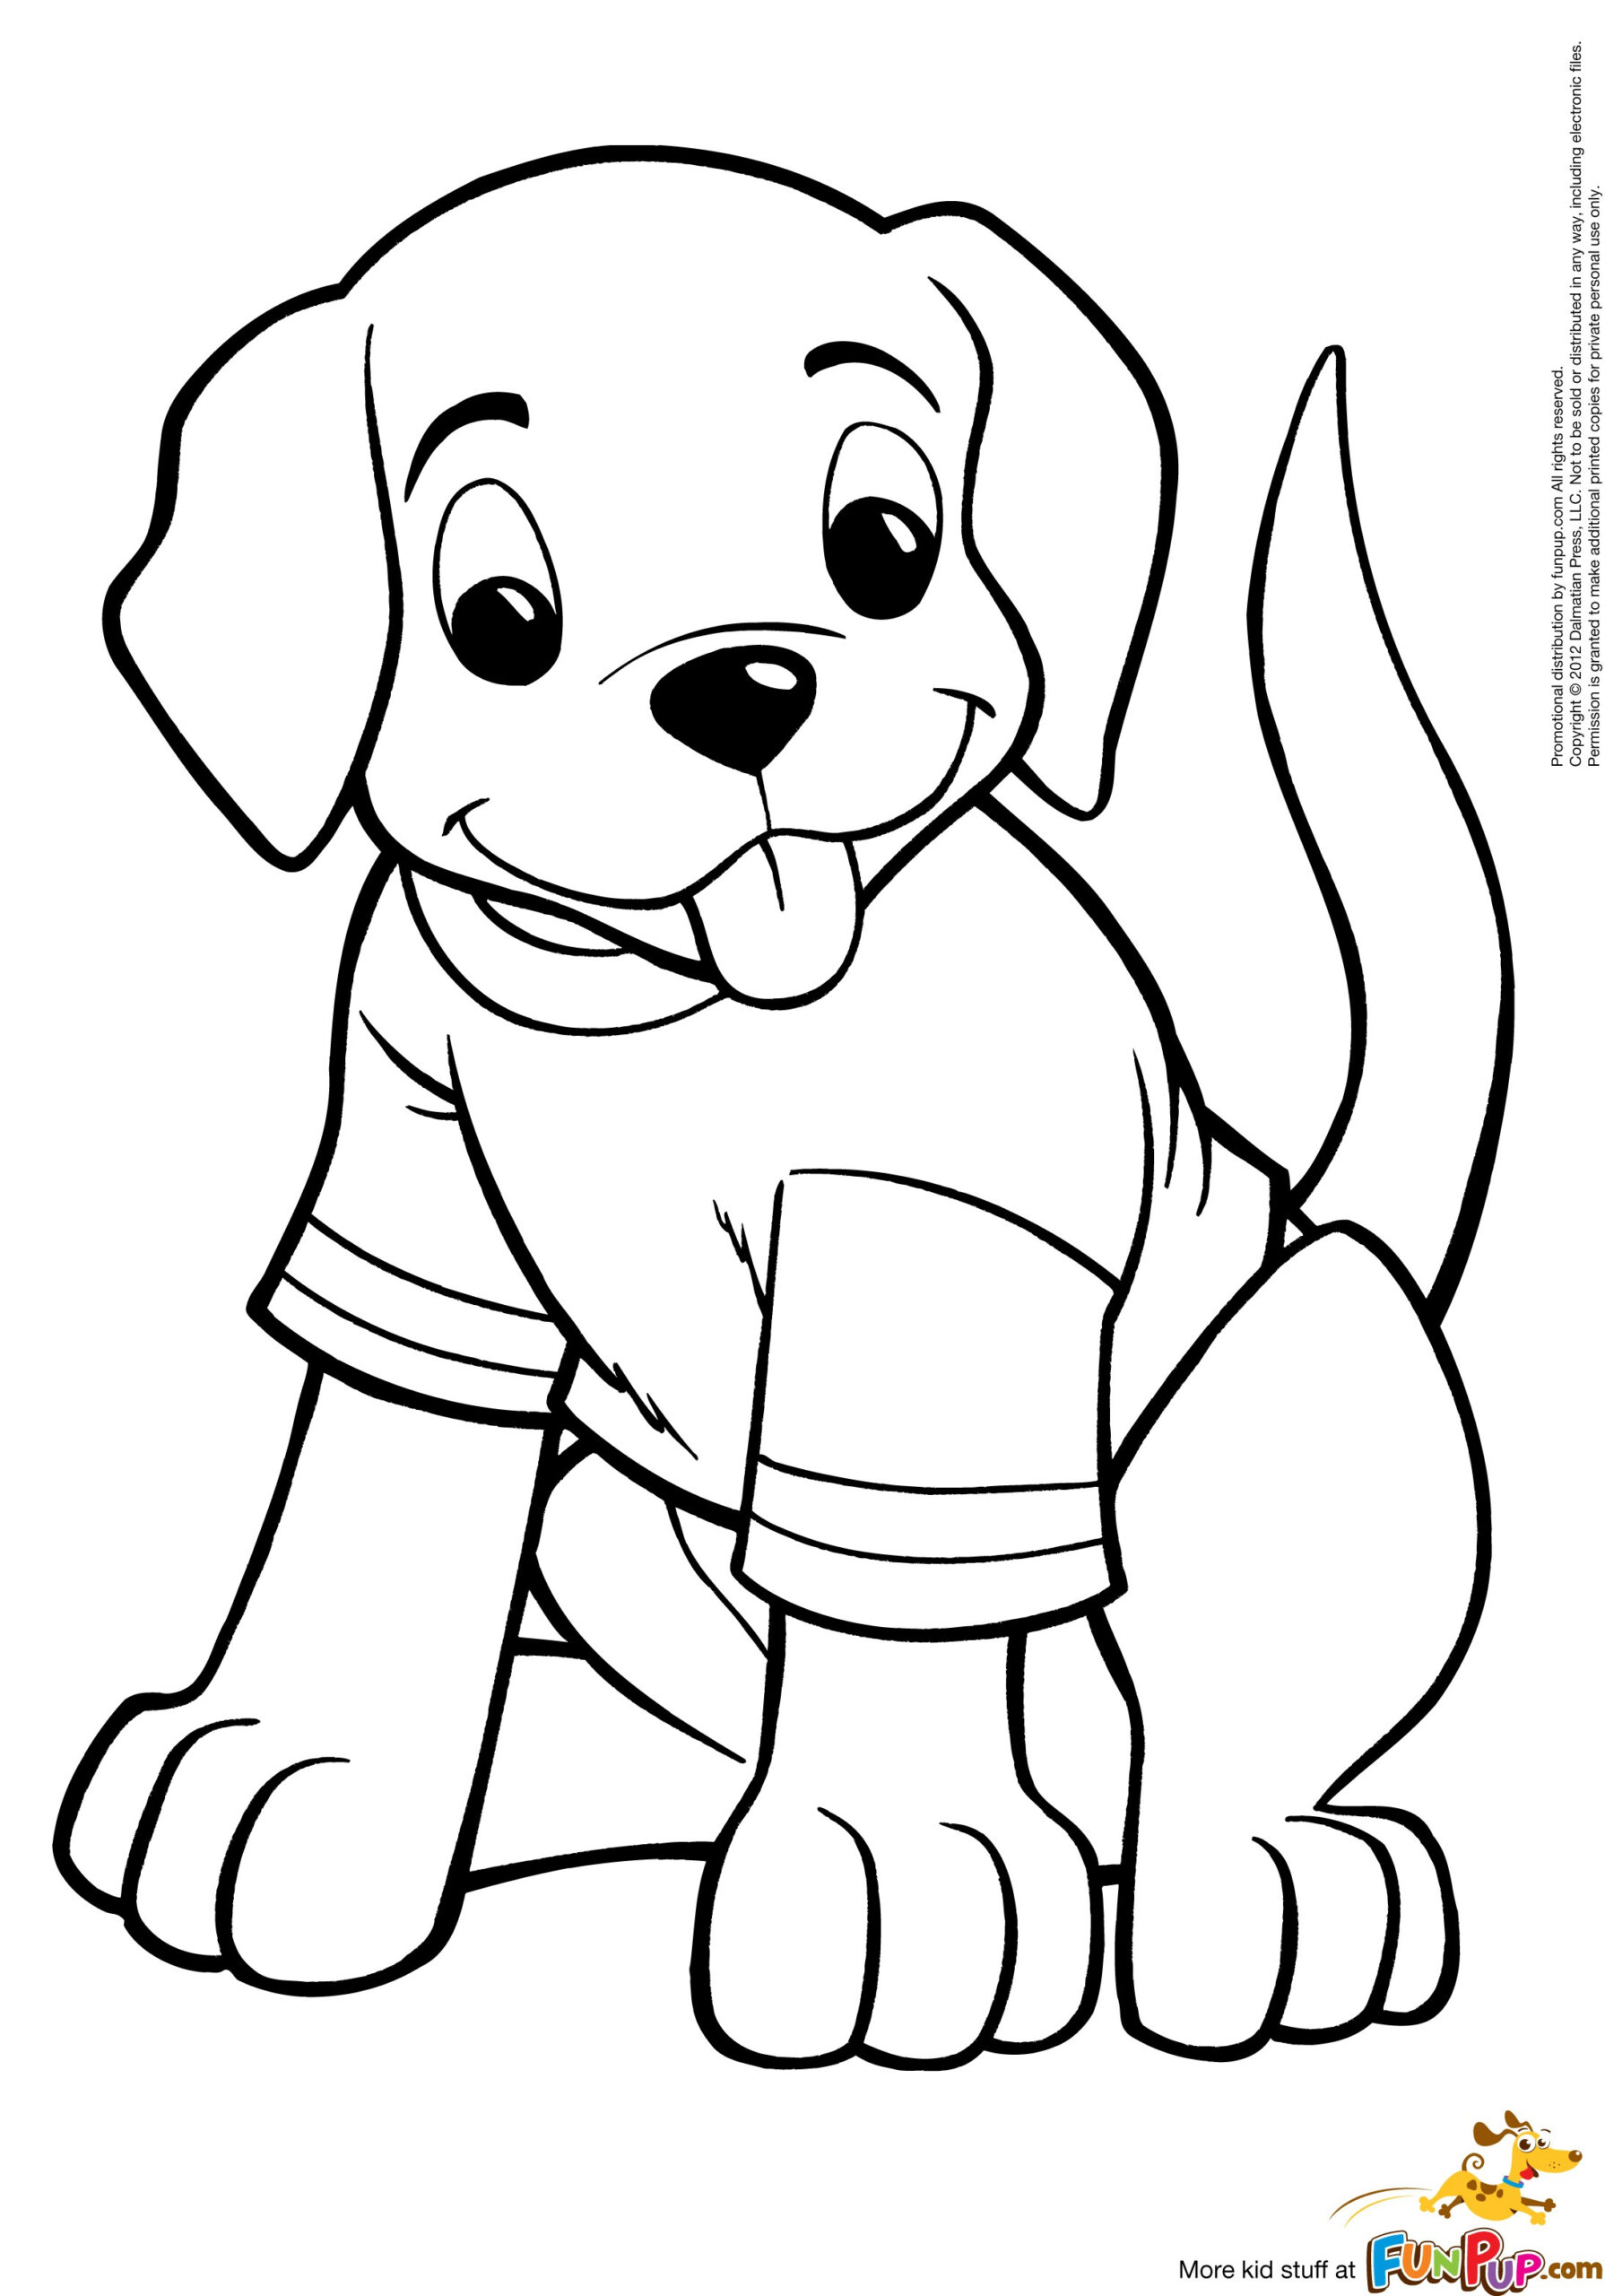 Sad Puppy Coloring Pages At GetColorings Free Printable Colorings 